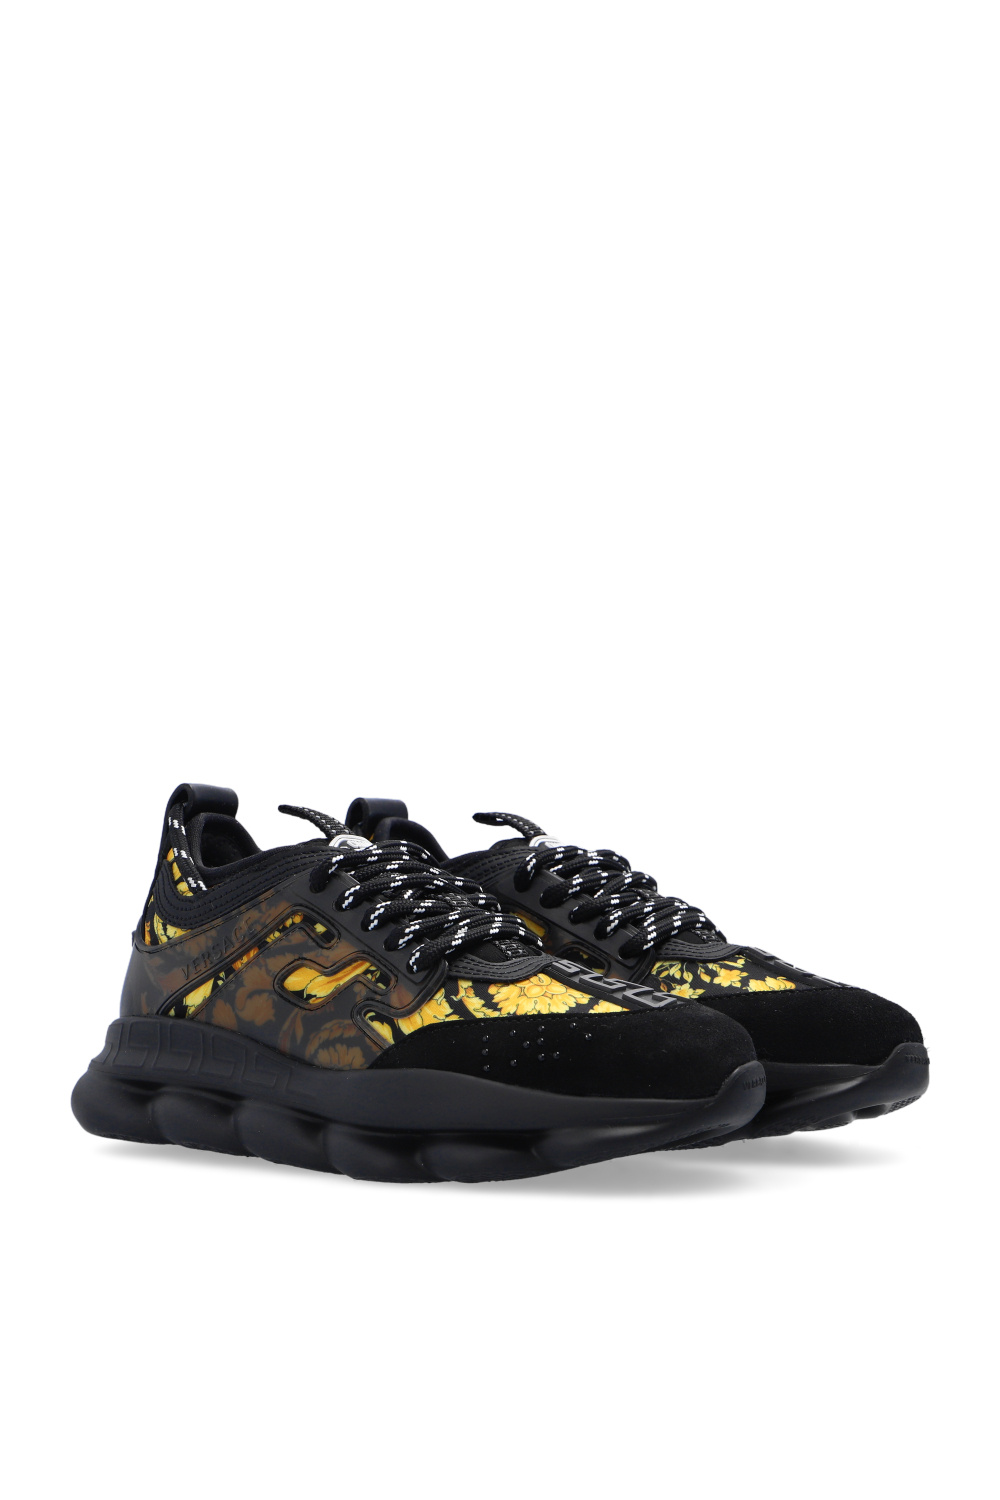 Versace Chain Reaction Sneakers black /white / brown size 37